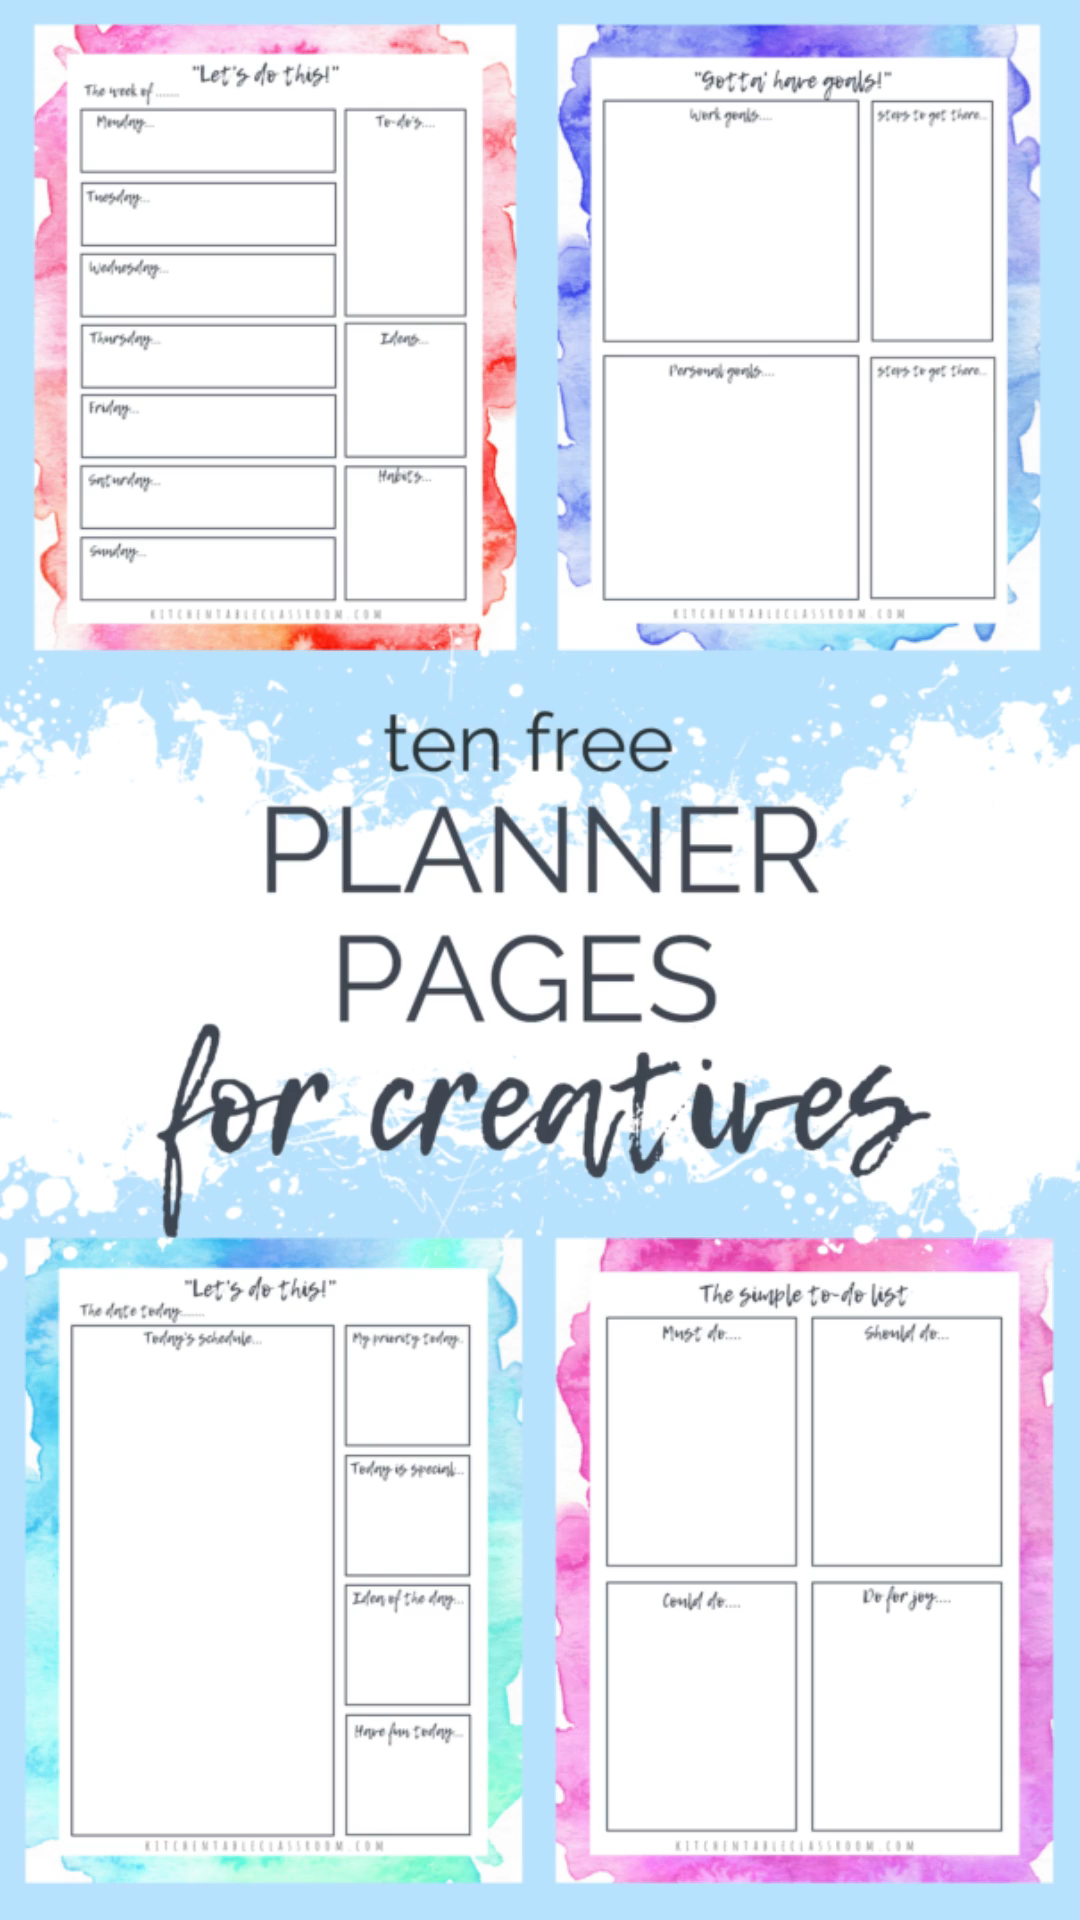 Free Planner for Creatives - Free Planner for Creatives -   17 fitness Planner notebooks ideas